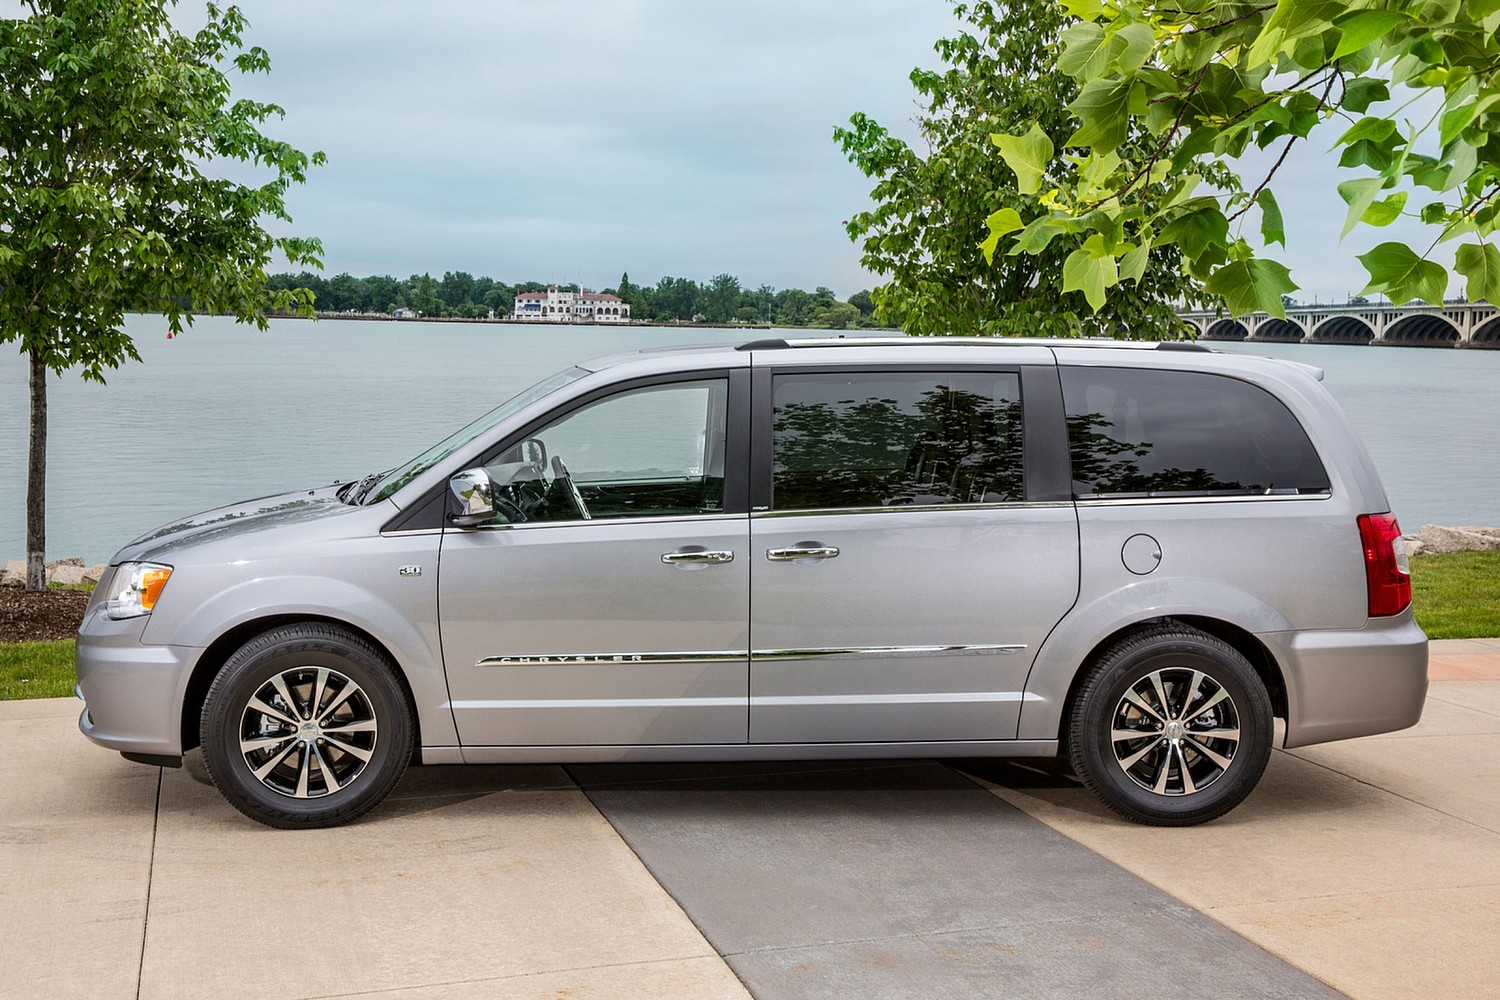 2016 Chrysler Town and Country Anniversary Edition Passenger Minivan Exterior